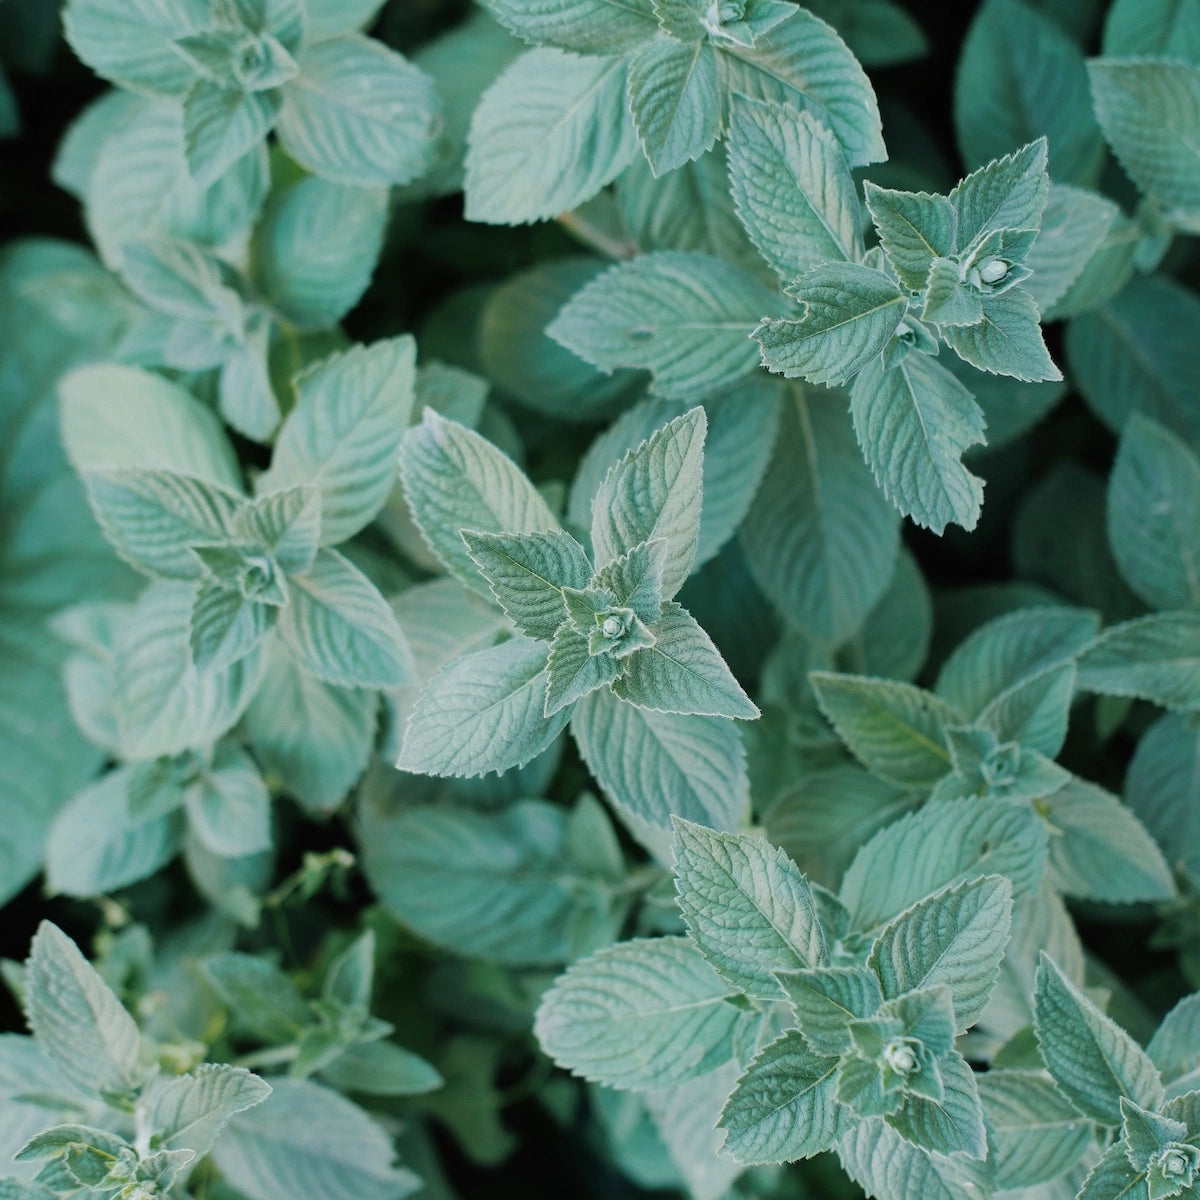 A close up of some deep green peppermint leaves.